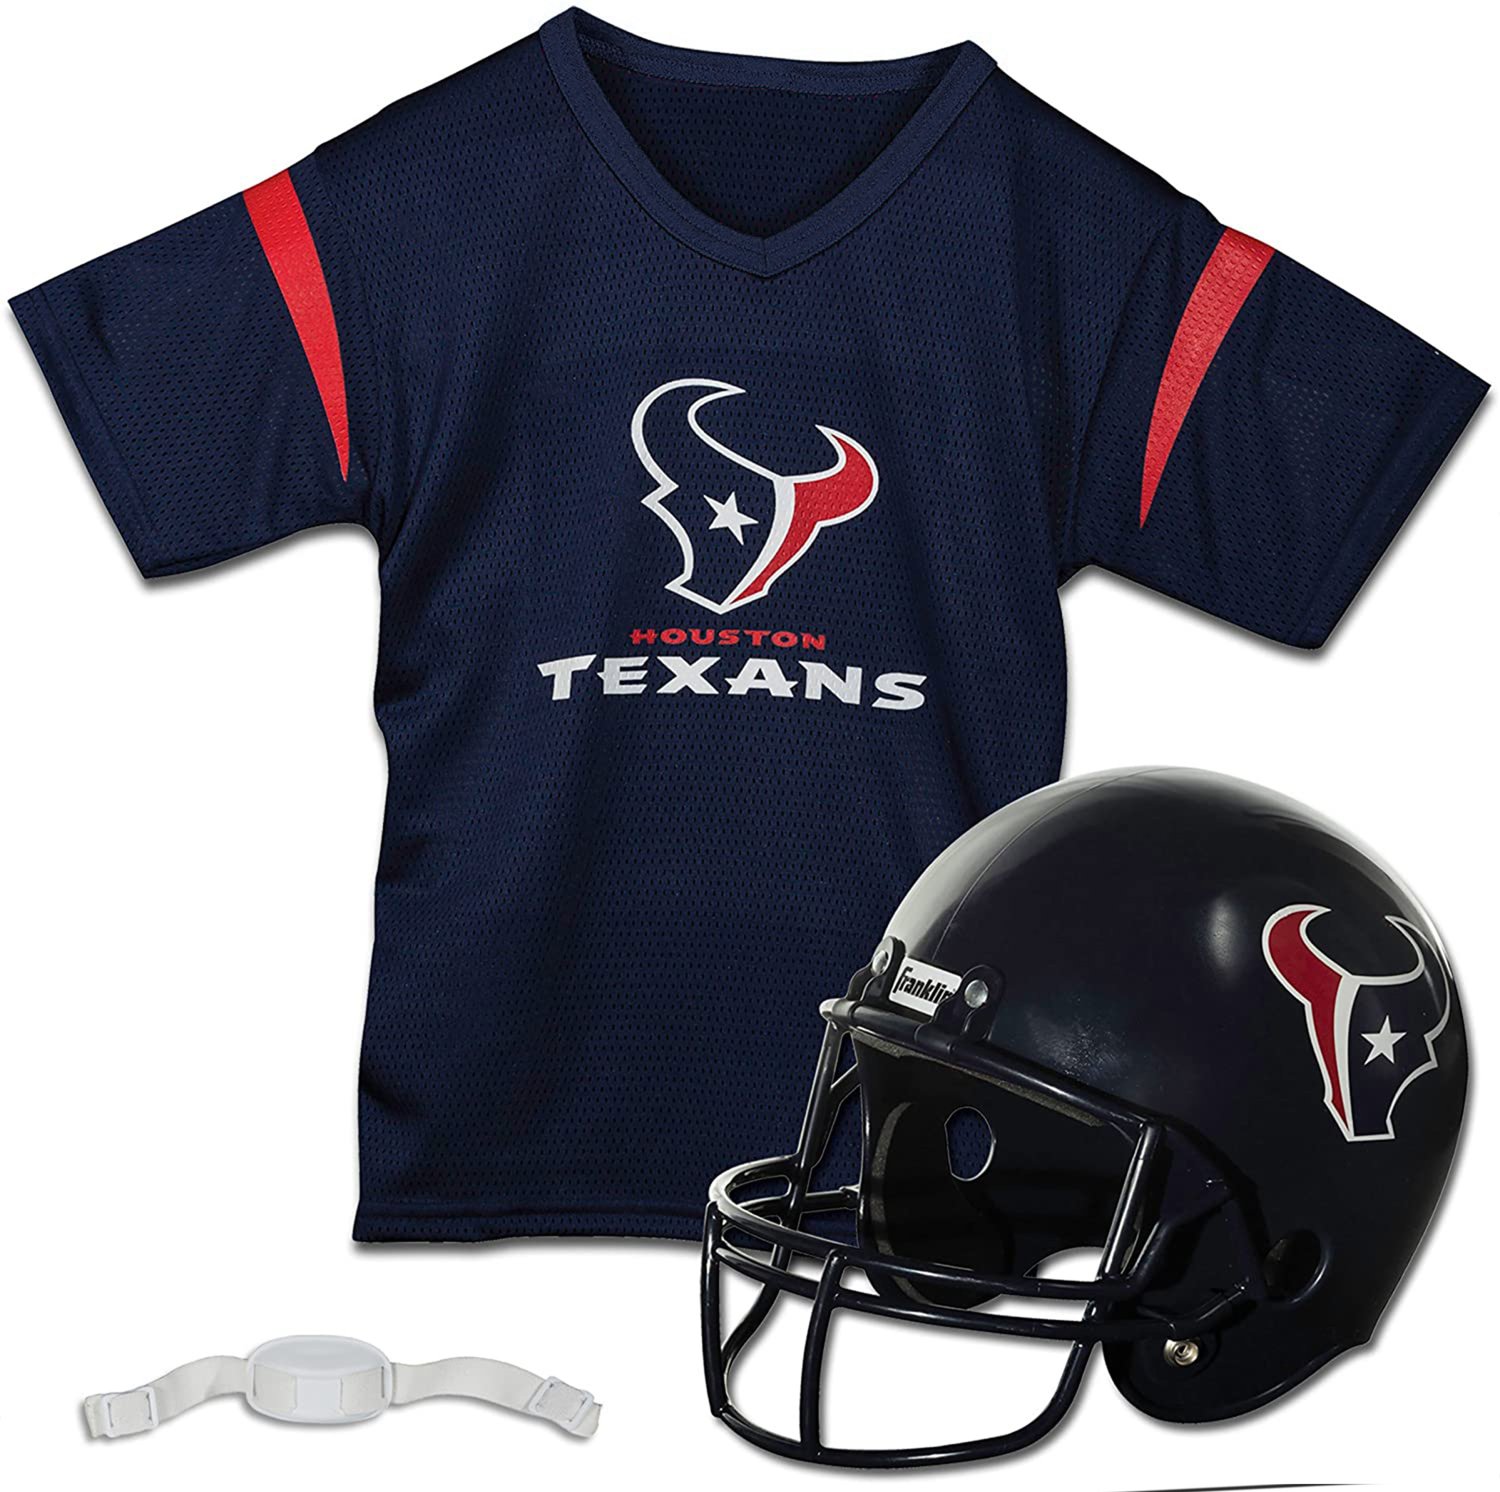 Franklin Youth Houston Texans Helmet and Jersey Set